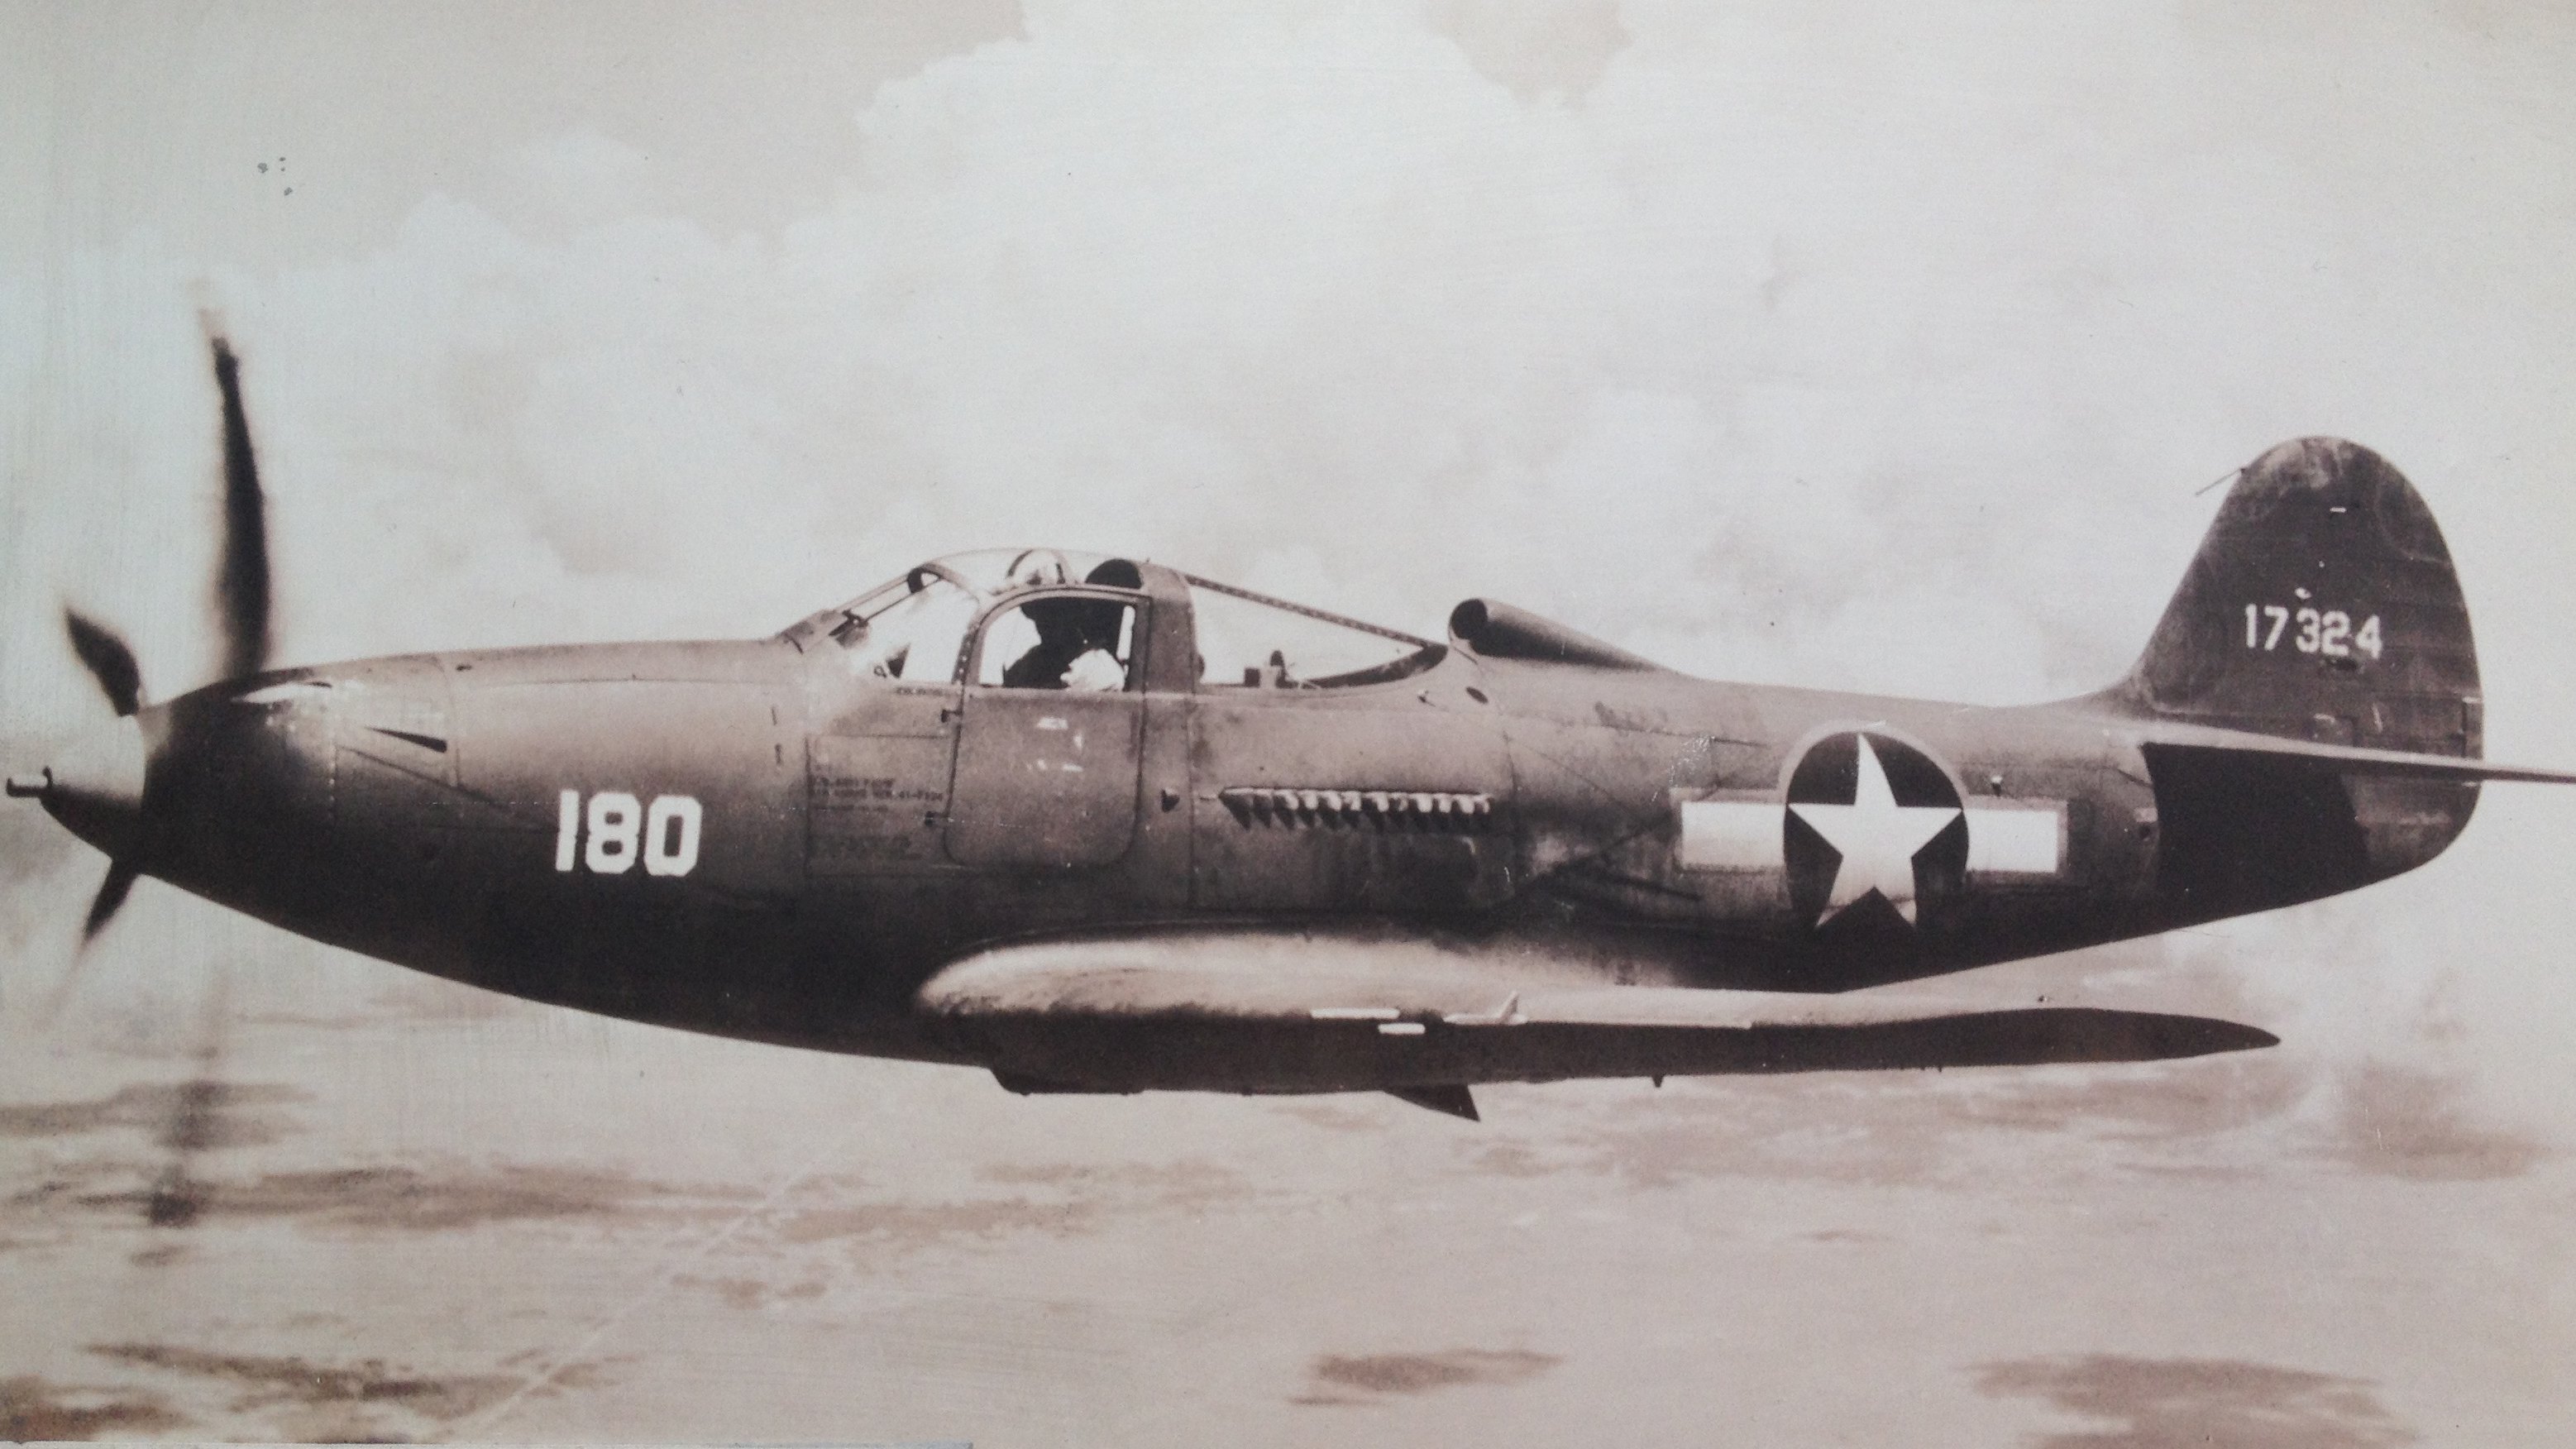 We see a black-and-white photo of a P-39 Bell Airacobra flying in the air.